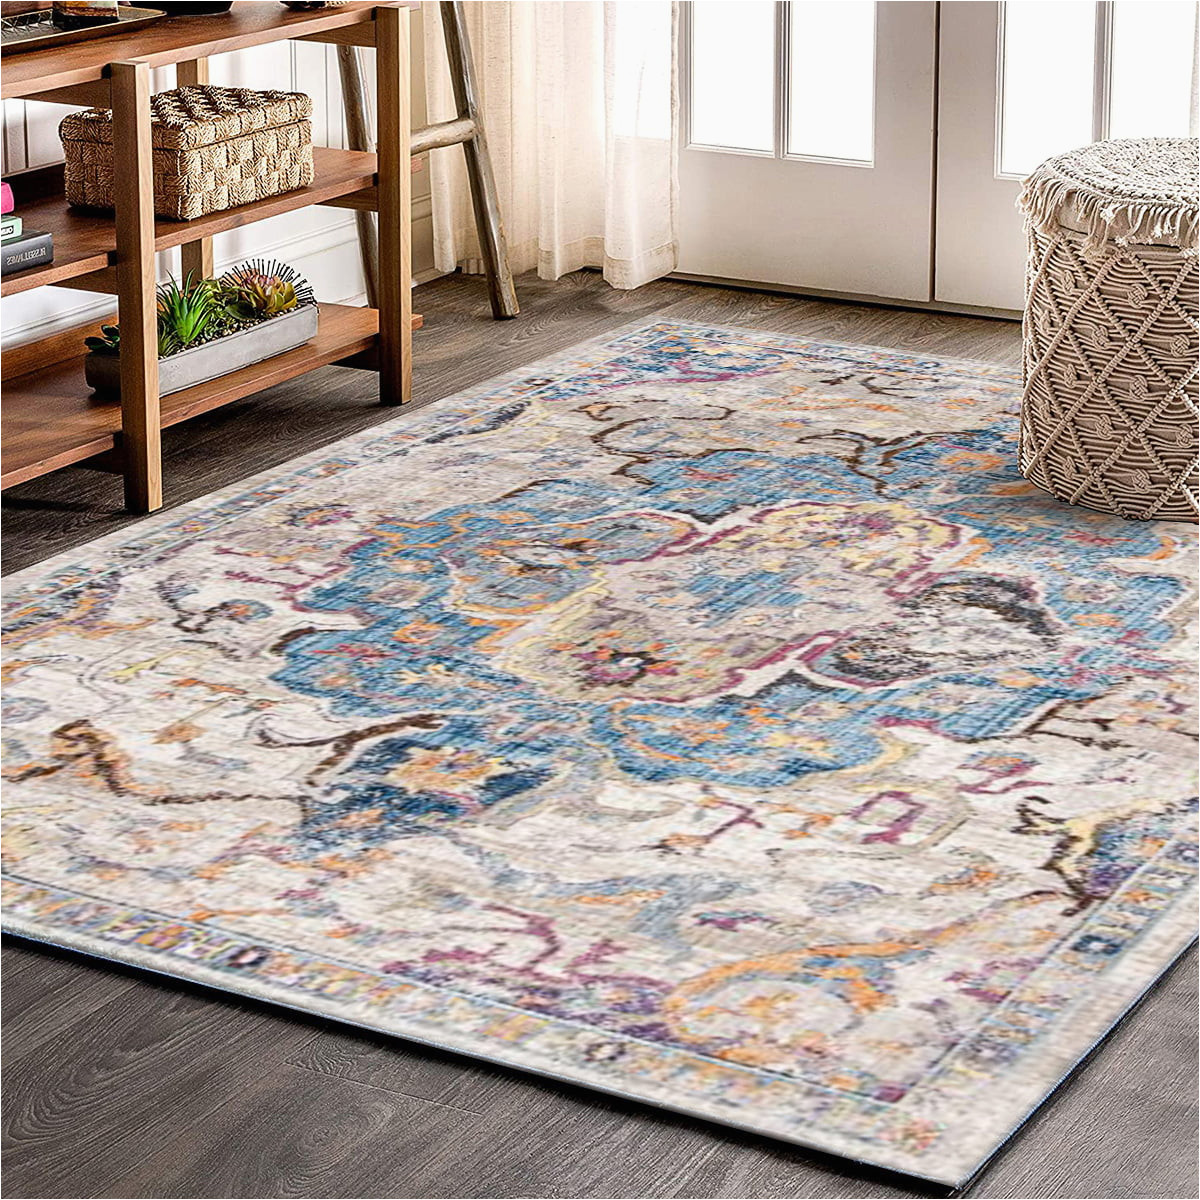 4 X 9 area Rug Snailhome Rugs for Room, 4′ X 5′ 9″, 5′ 2″ X 7′ 5″, 6′ 6″ X 9′ 5″ Non-slip Large area Rug Carpet Floor Mat, Living Room Bedroom Indoor Home Decor